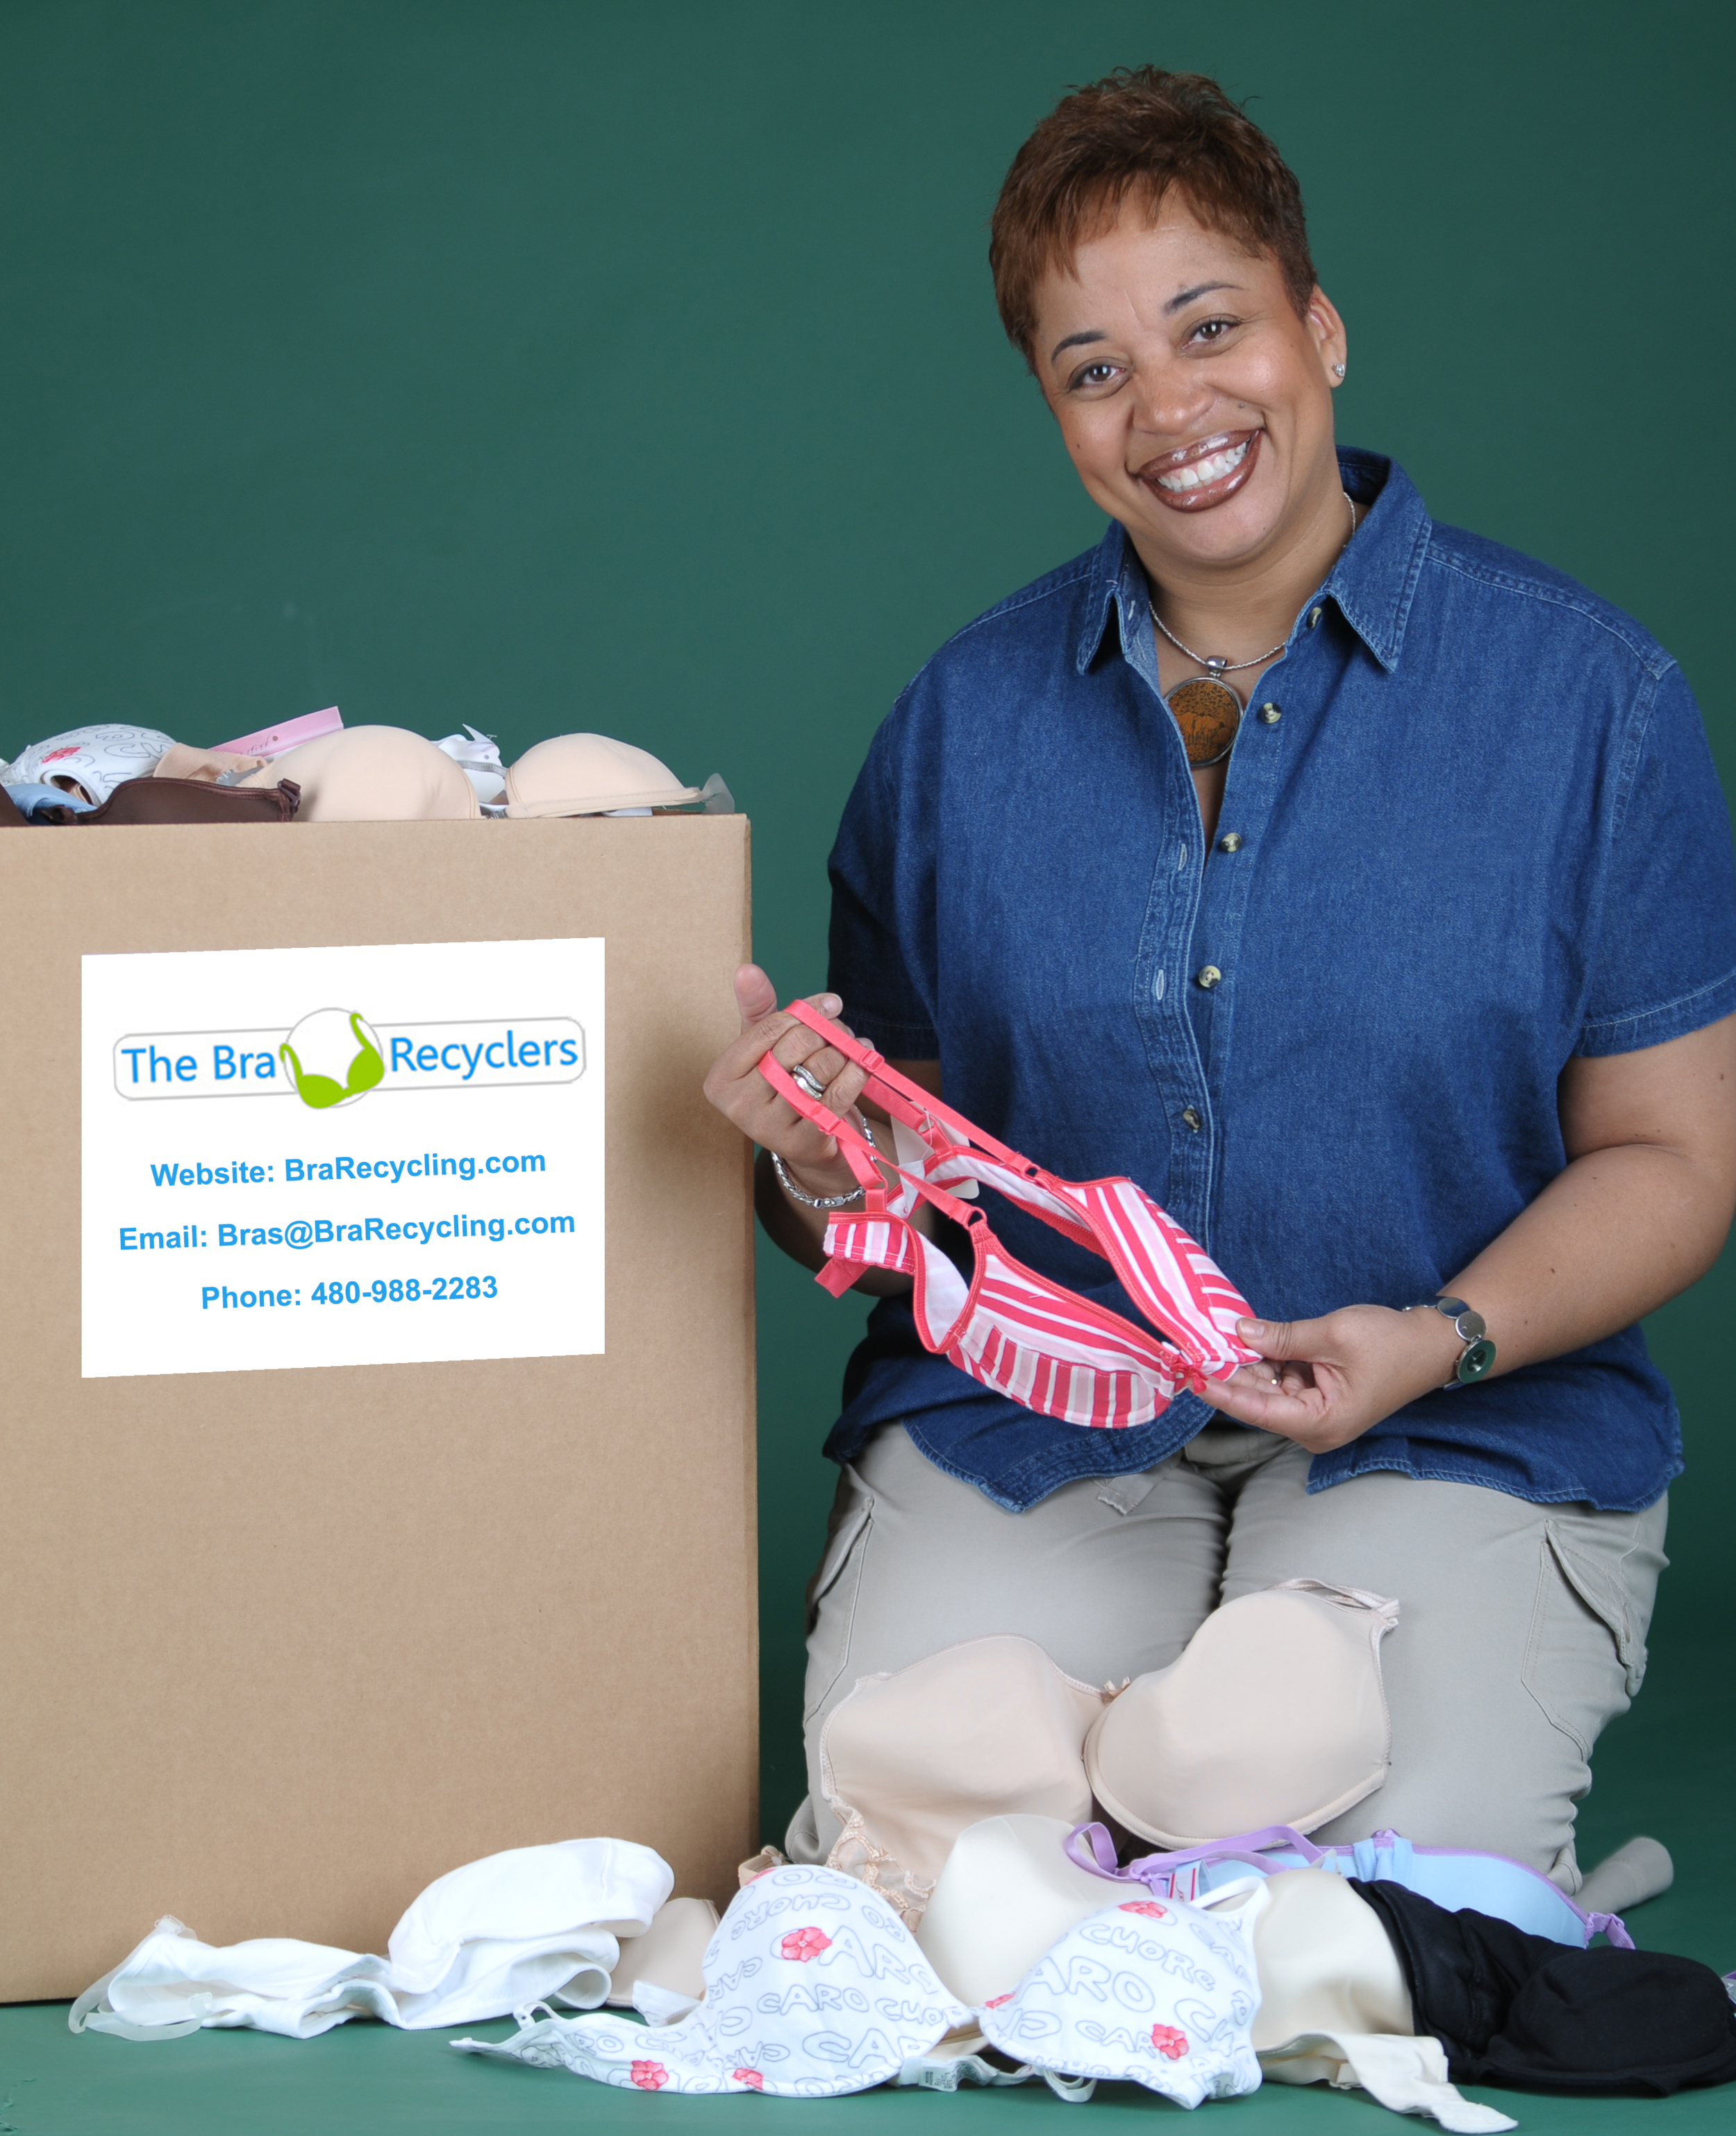 The Bra Recyclers — We Make Change